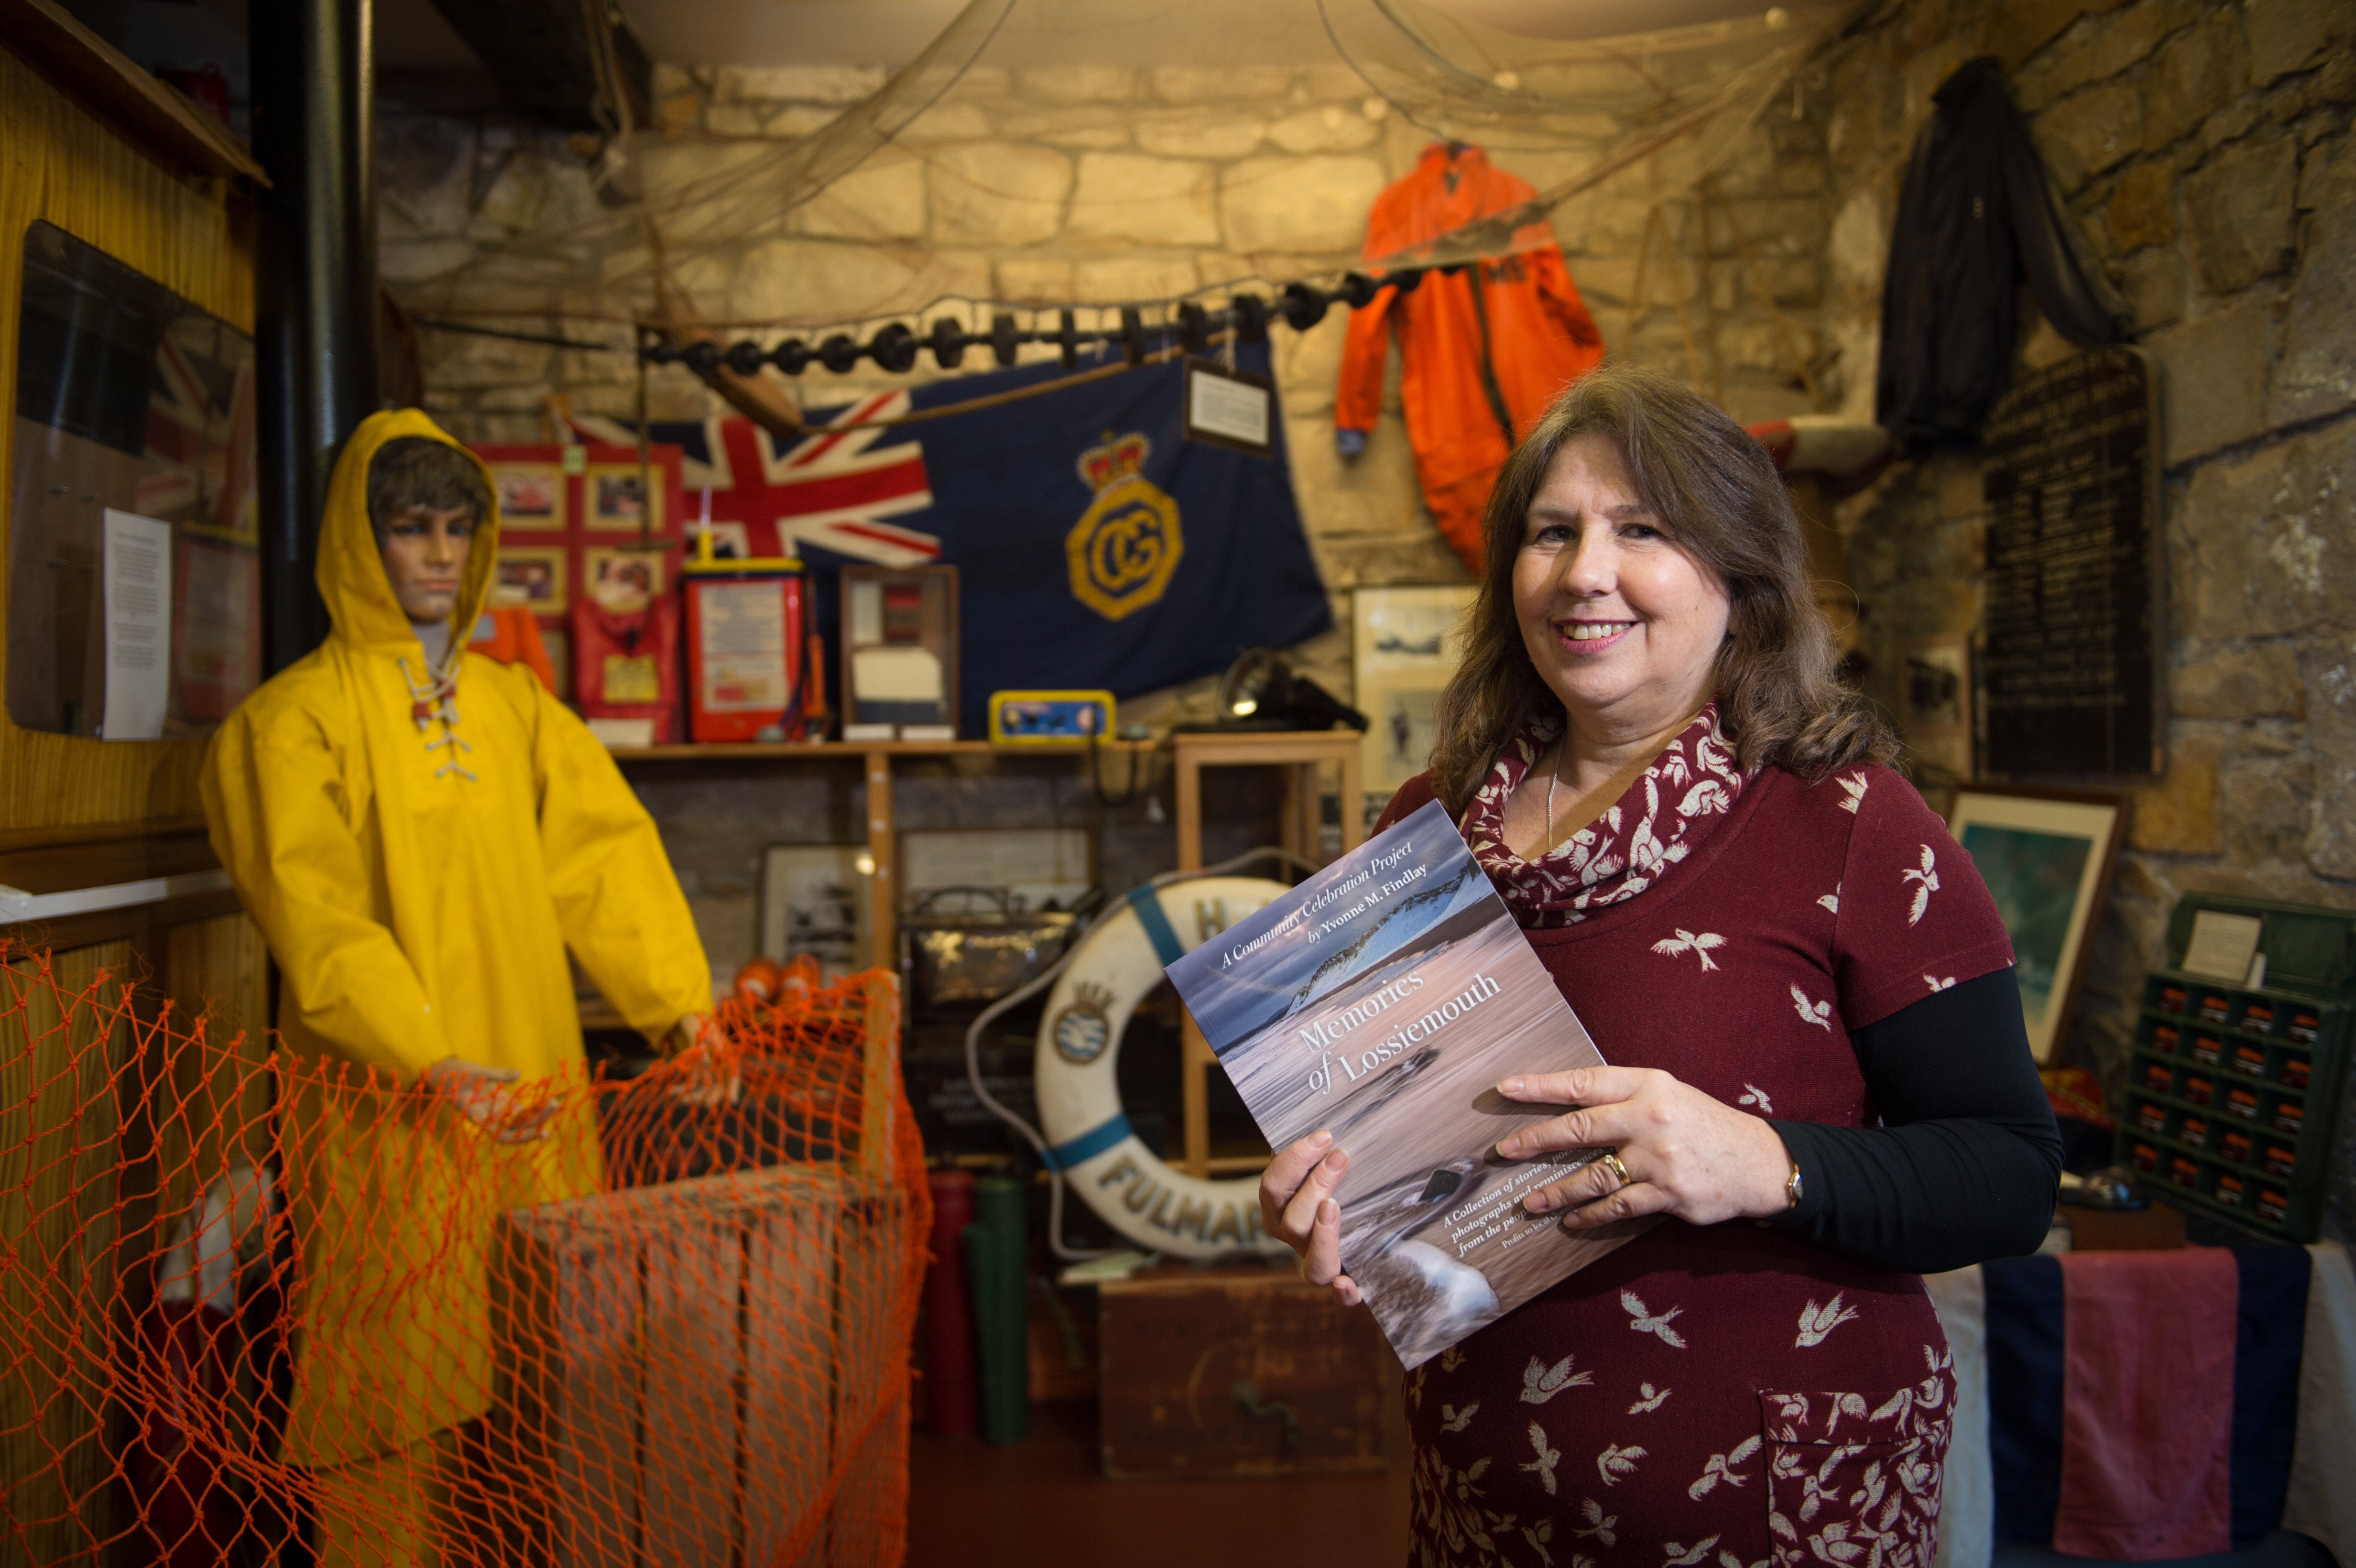 Yvonne Findlay - Author of Memories of Lossiemouth, launched today at Lossiemouth Fisheries and Community Museum in Lossiemouth, Moray.